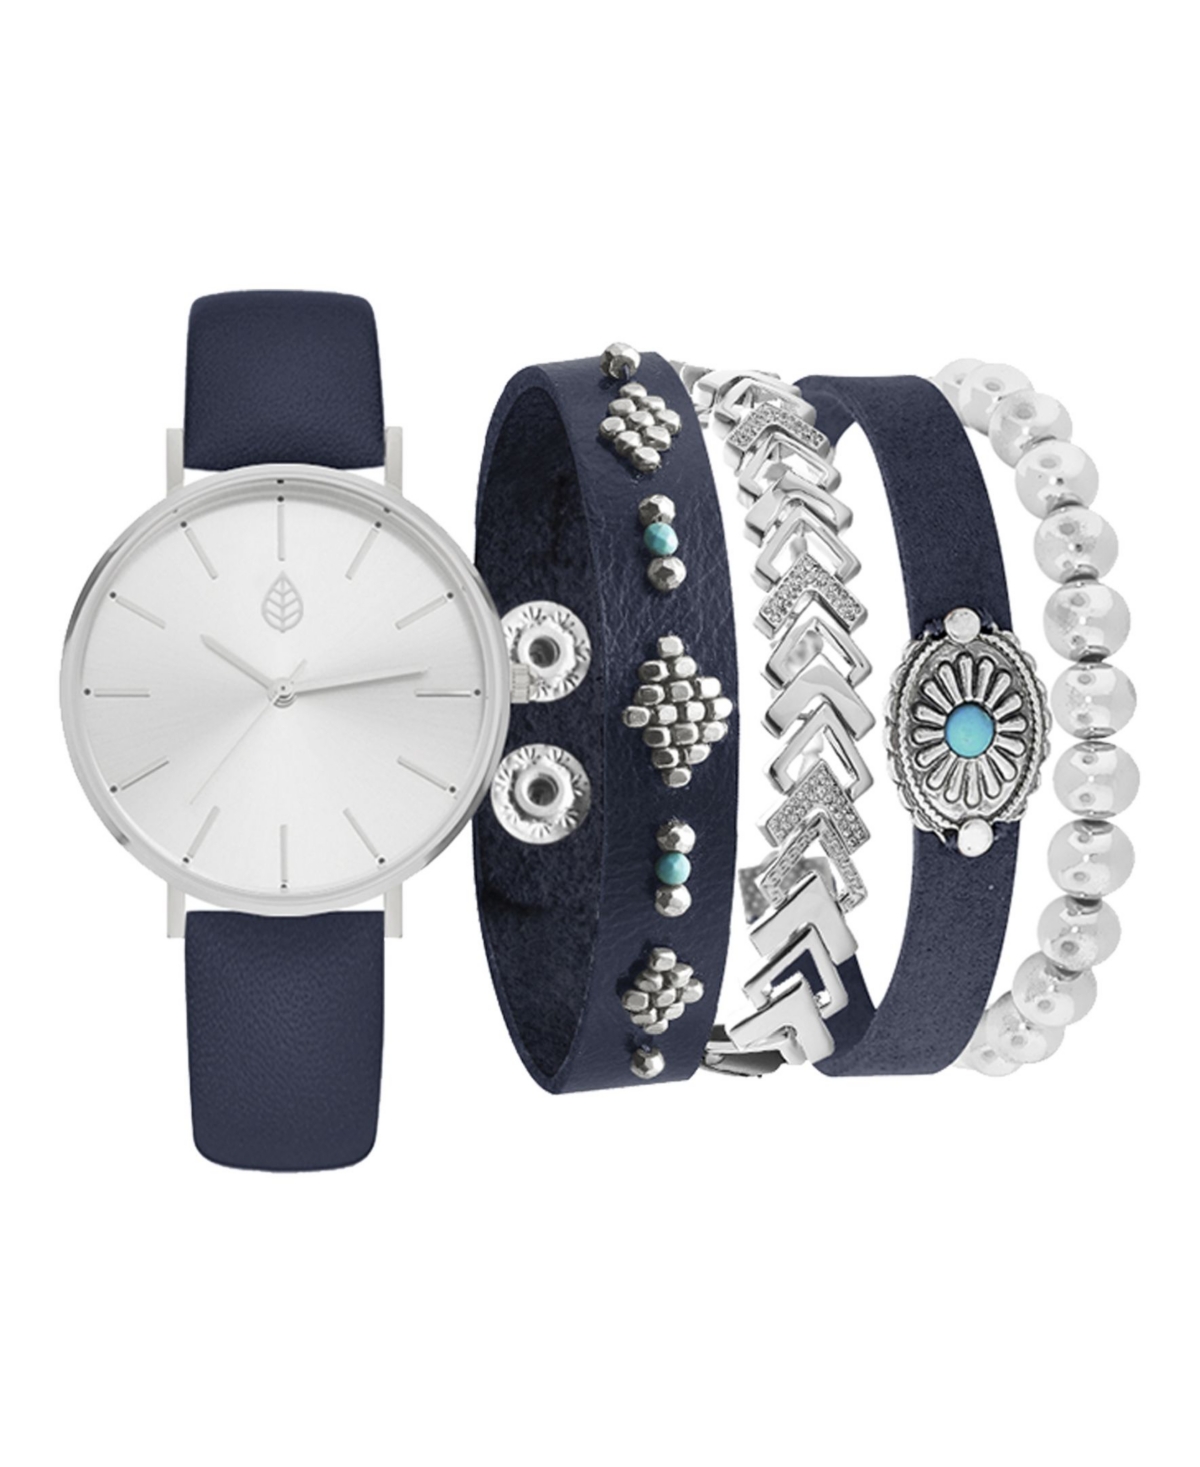 Women's Analog Navy Strap Watch 36mm with Navy and Silver-Tone Bracelets Set - Silver-tone